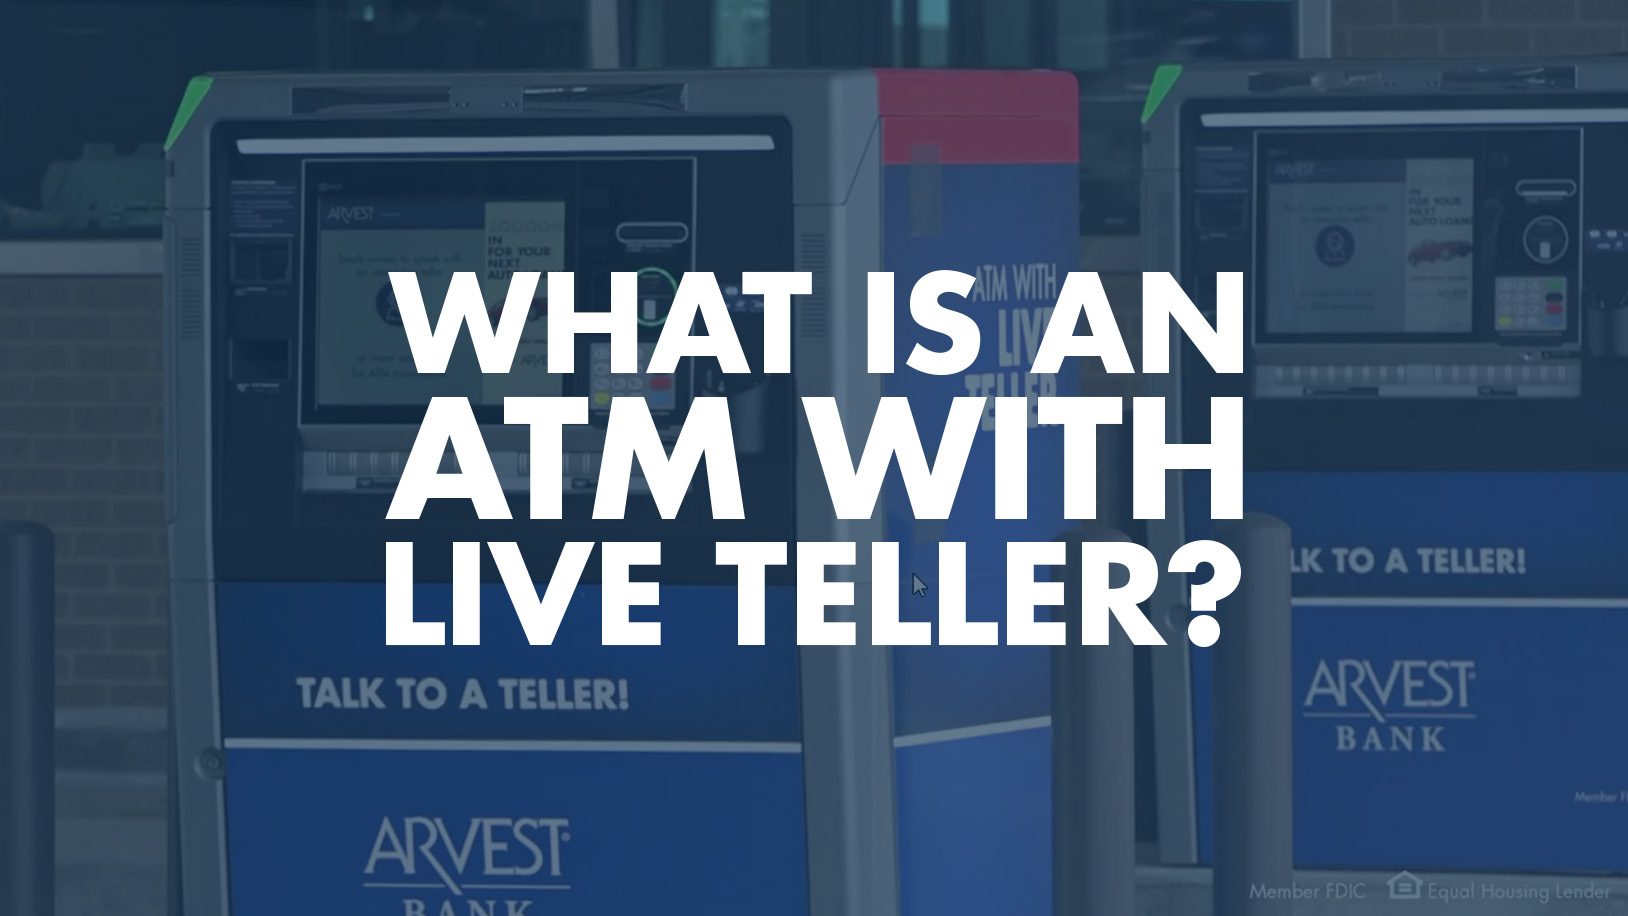 Adding a Personal Touch to Your ATM Experience - Arvest Share